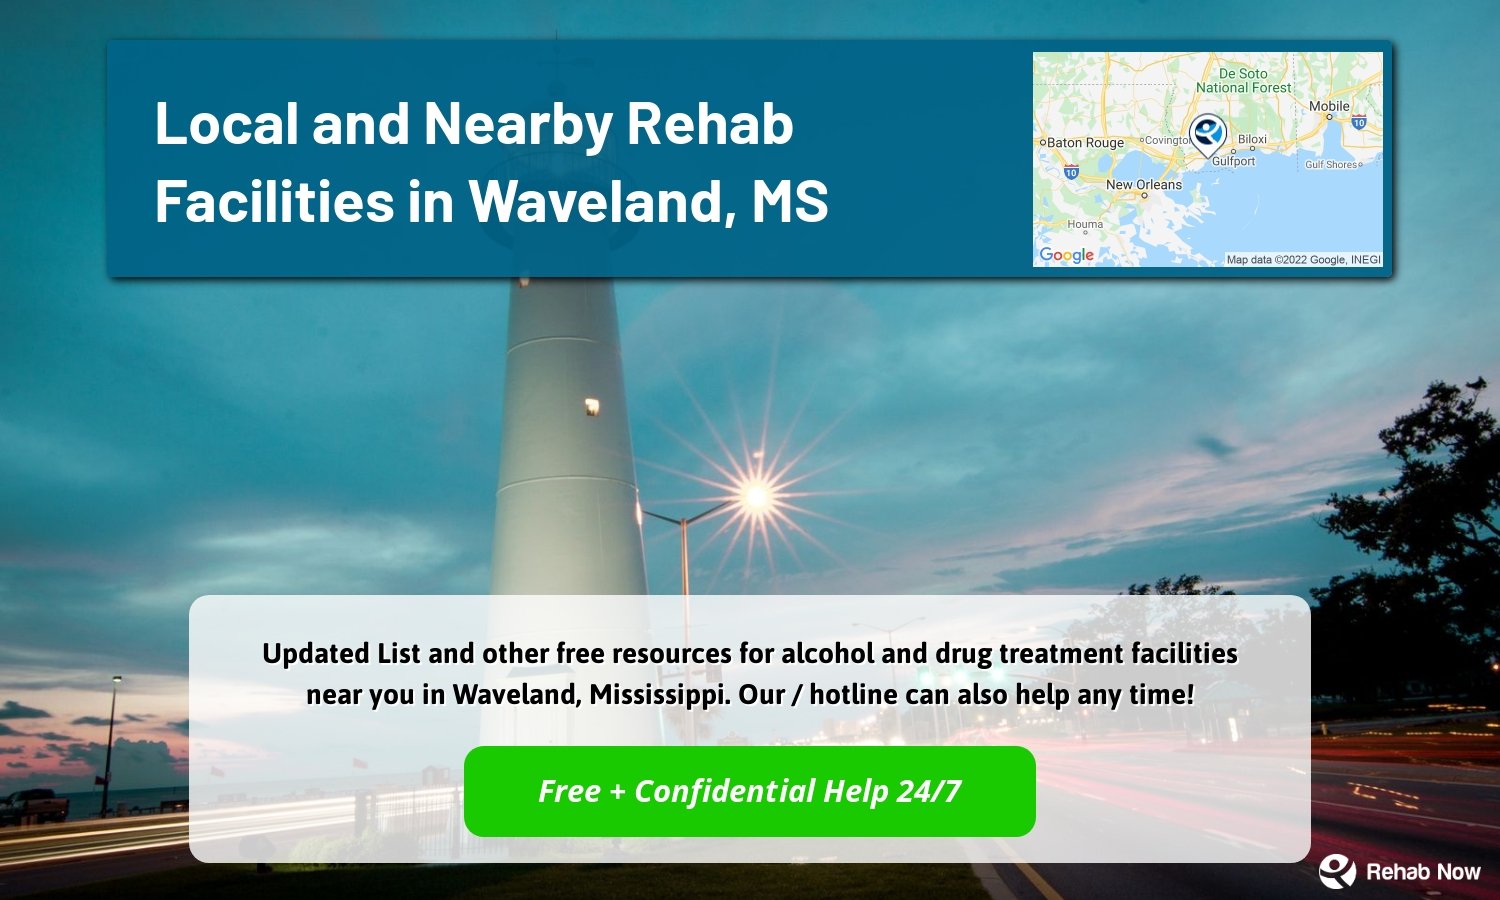  Updated List and other free resources for alcohol and drug treatment facilities near you in Waveland, Mississippi. Our / hotline can also help any time!